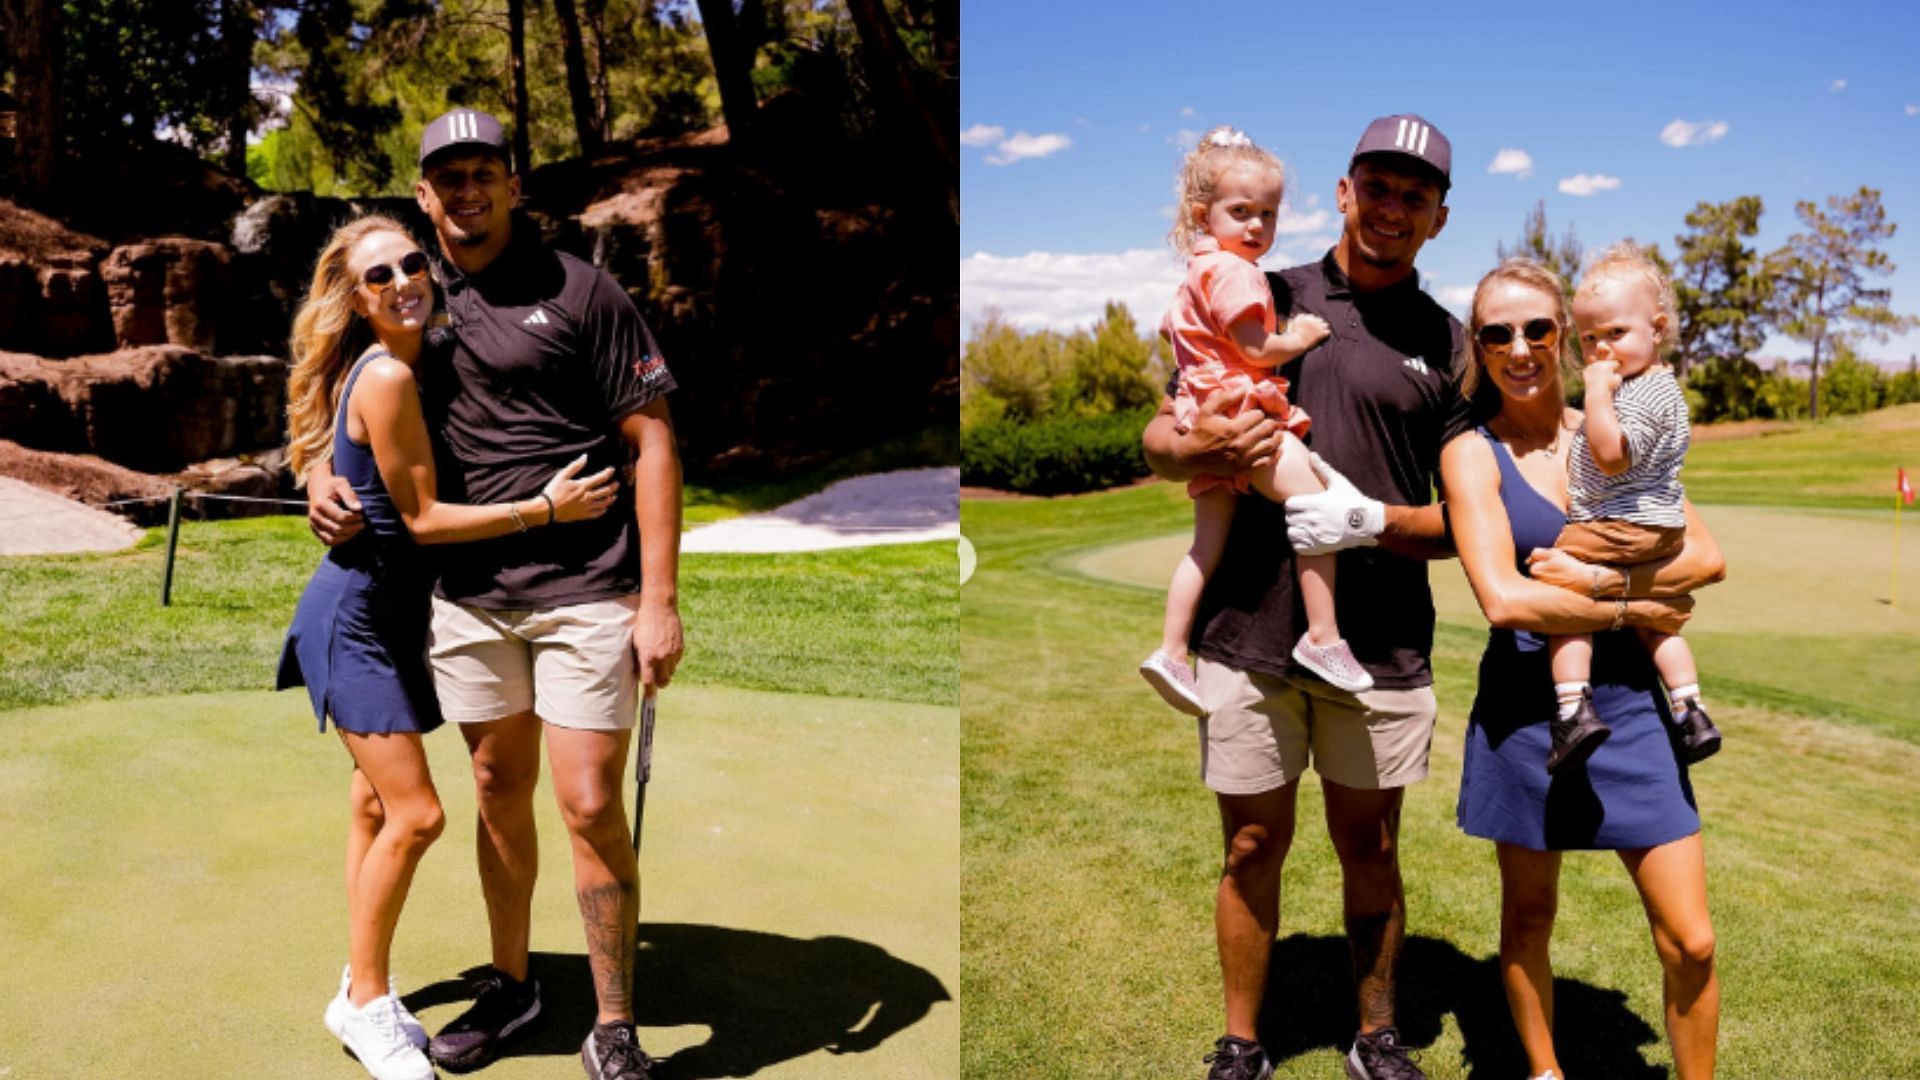 Brittany and Patrick Mahomes spent a day on the course.